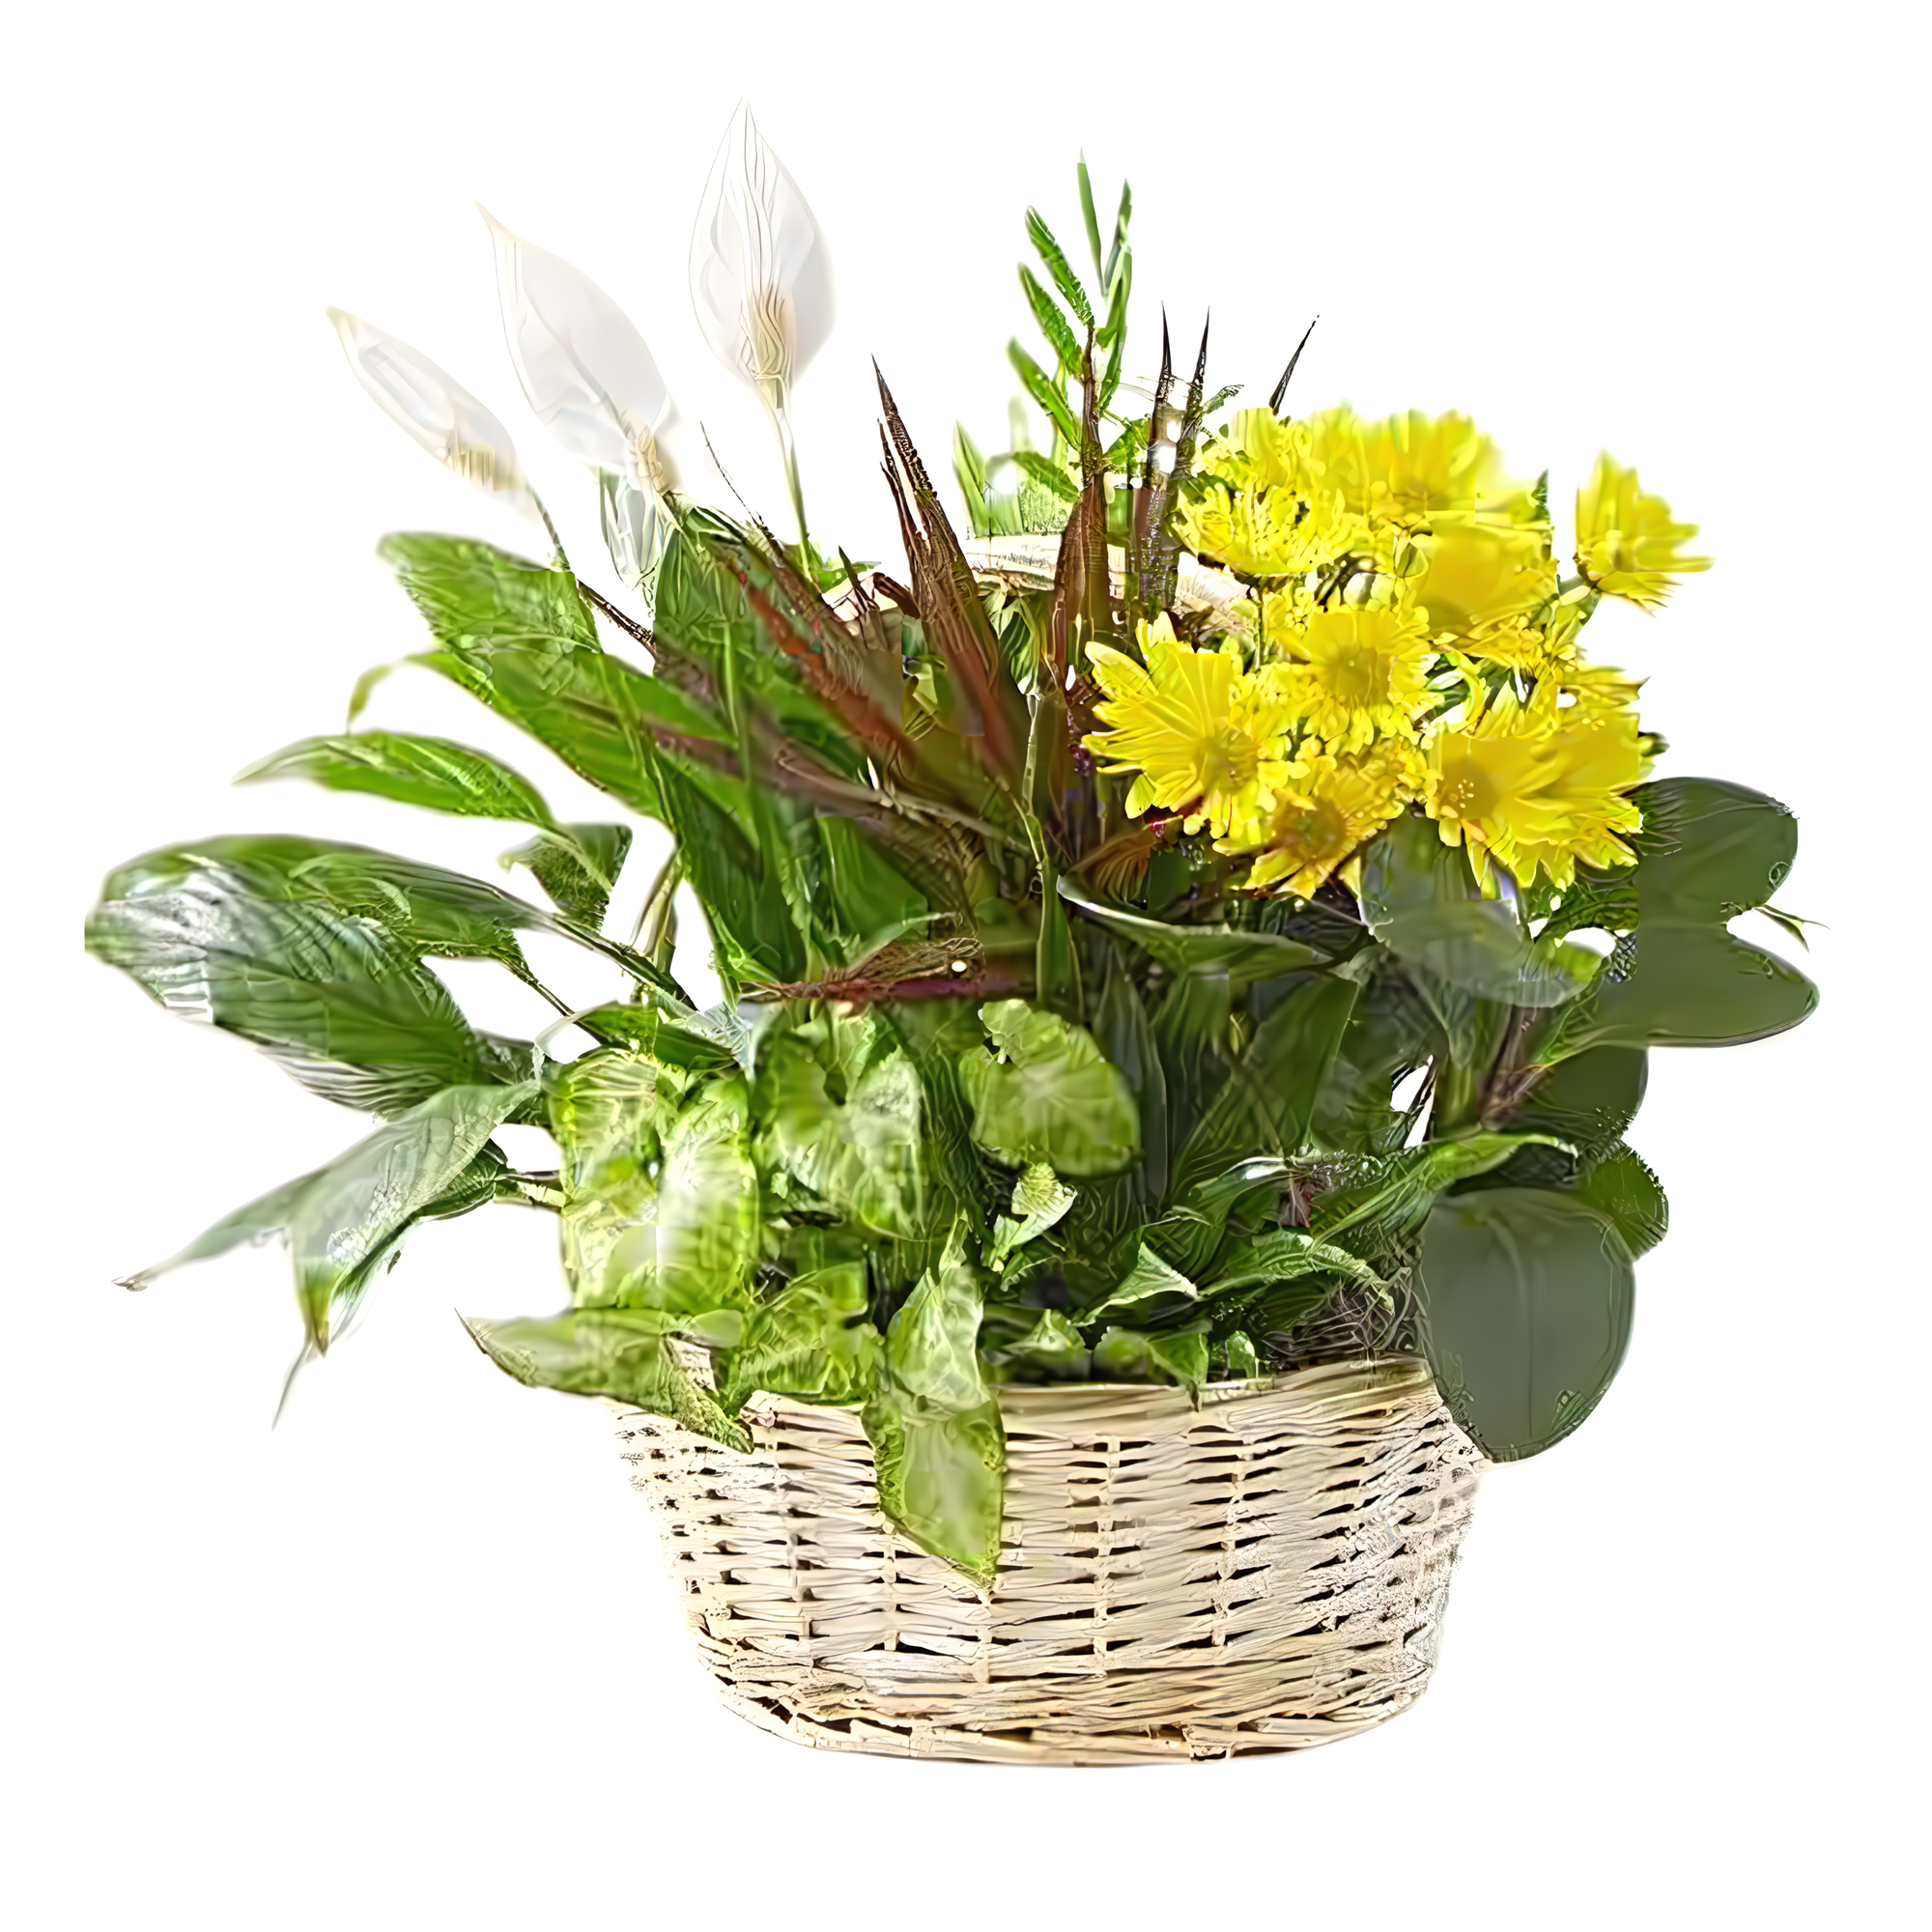 Manhattan Flower Delivery - With Love Dish Garden & Fresh Cut Flowers - Funeral > For the Home